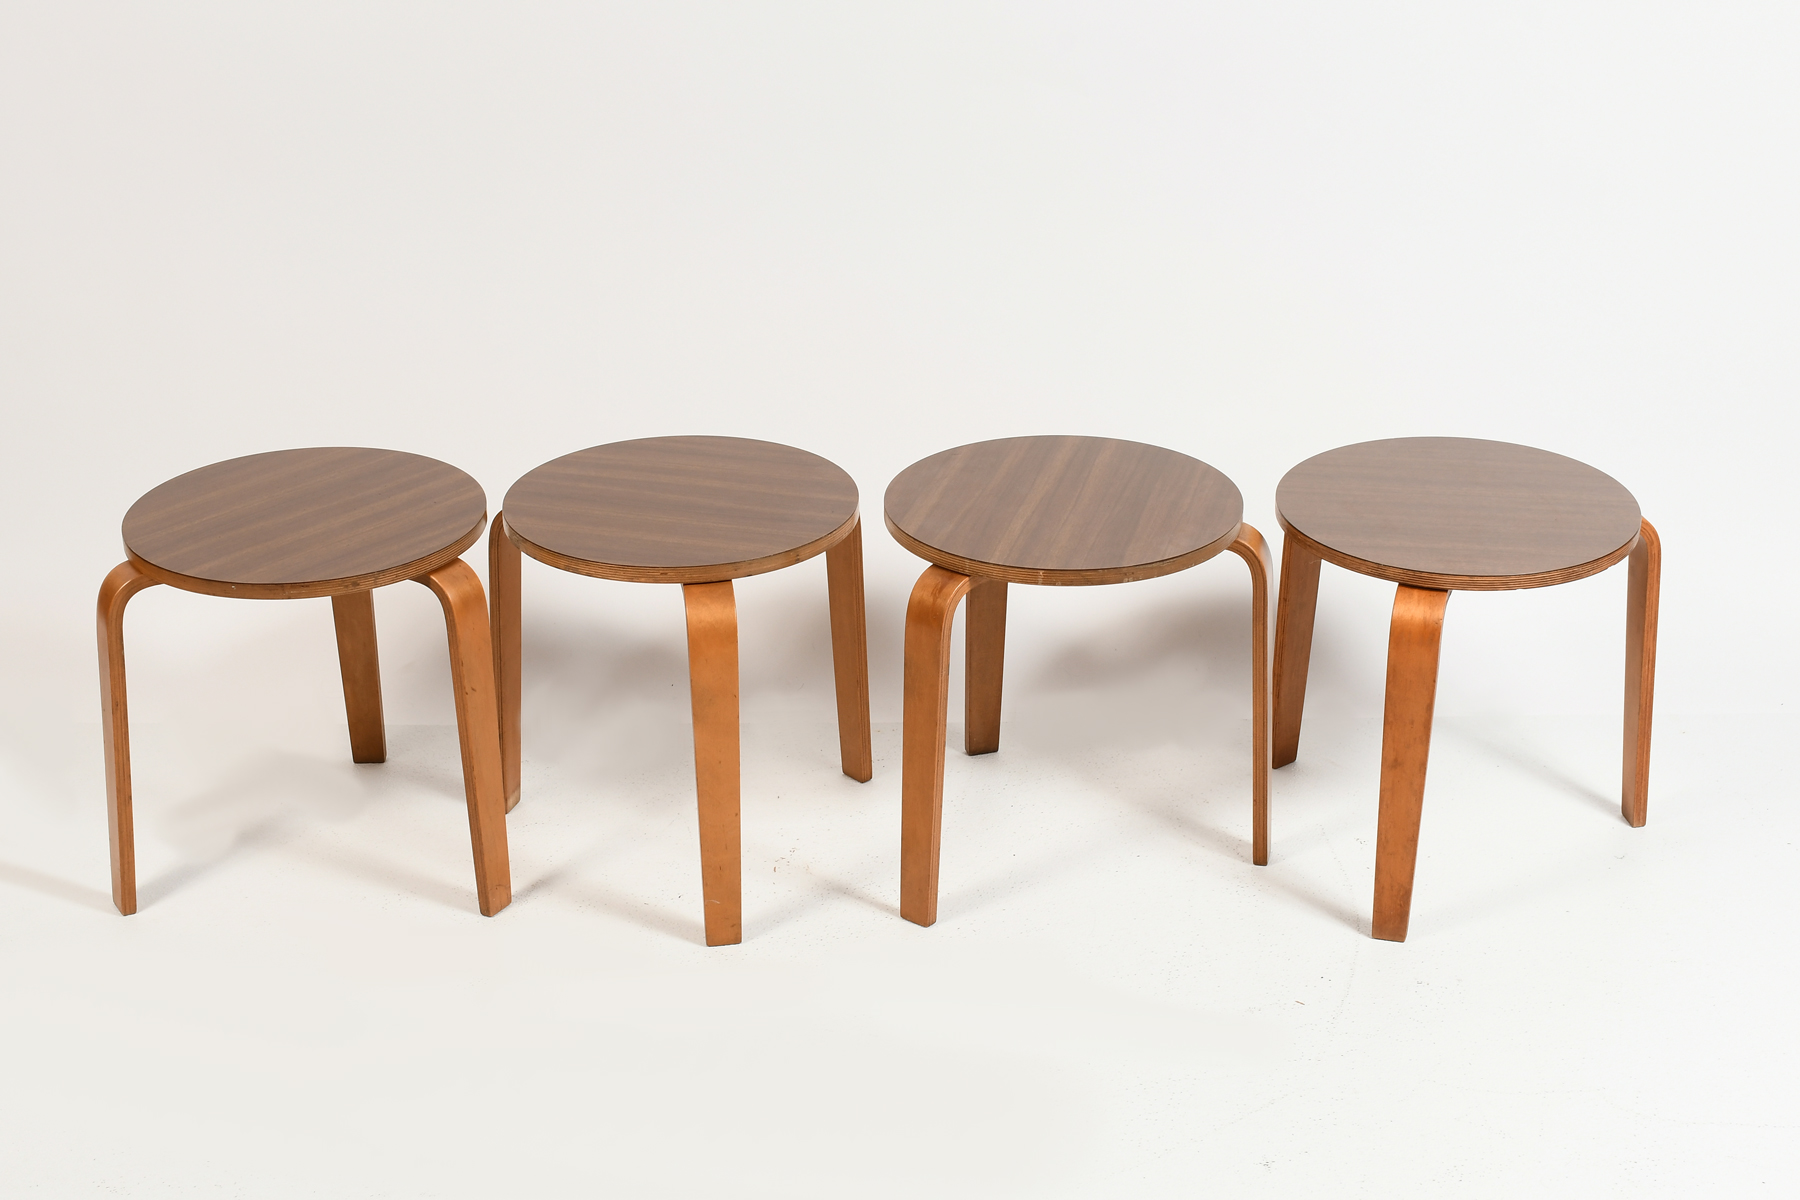 4 MID-CENTURY MODERN STACKING TABLES: